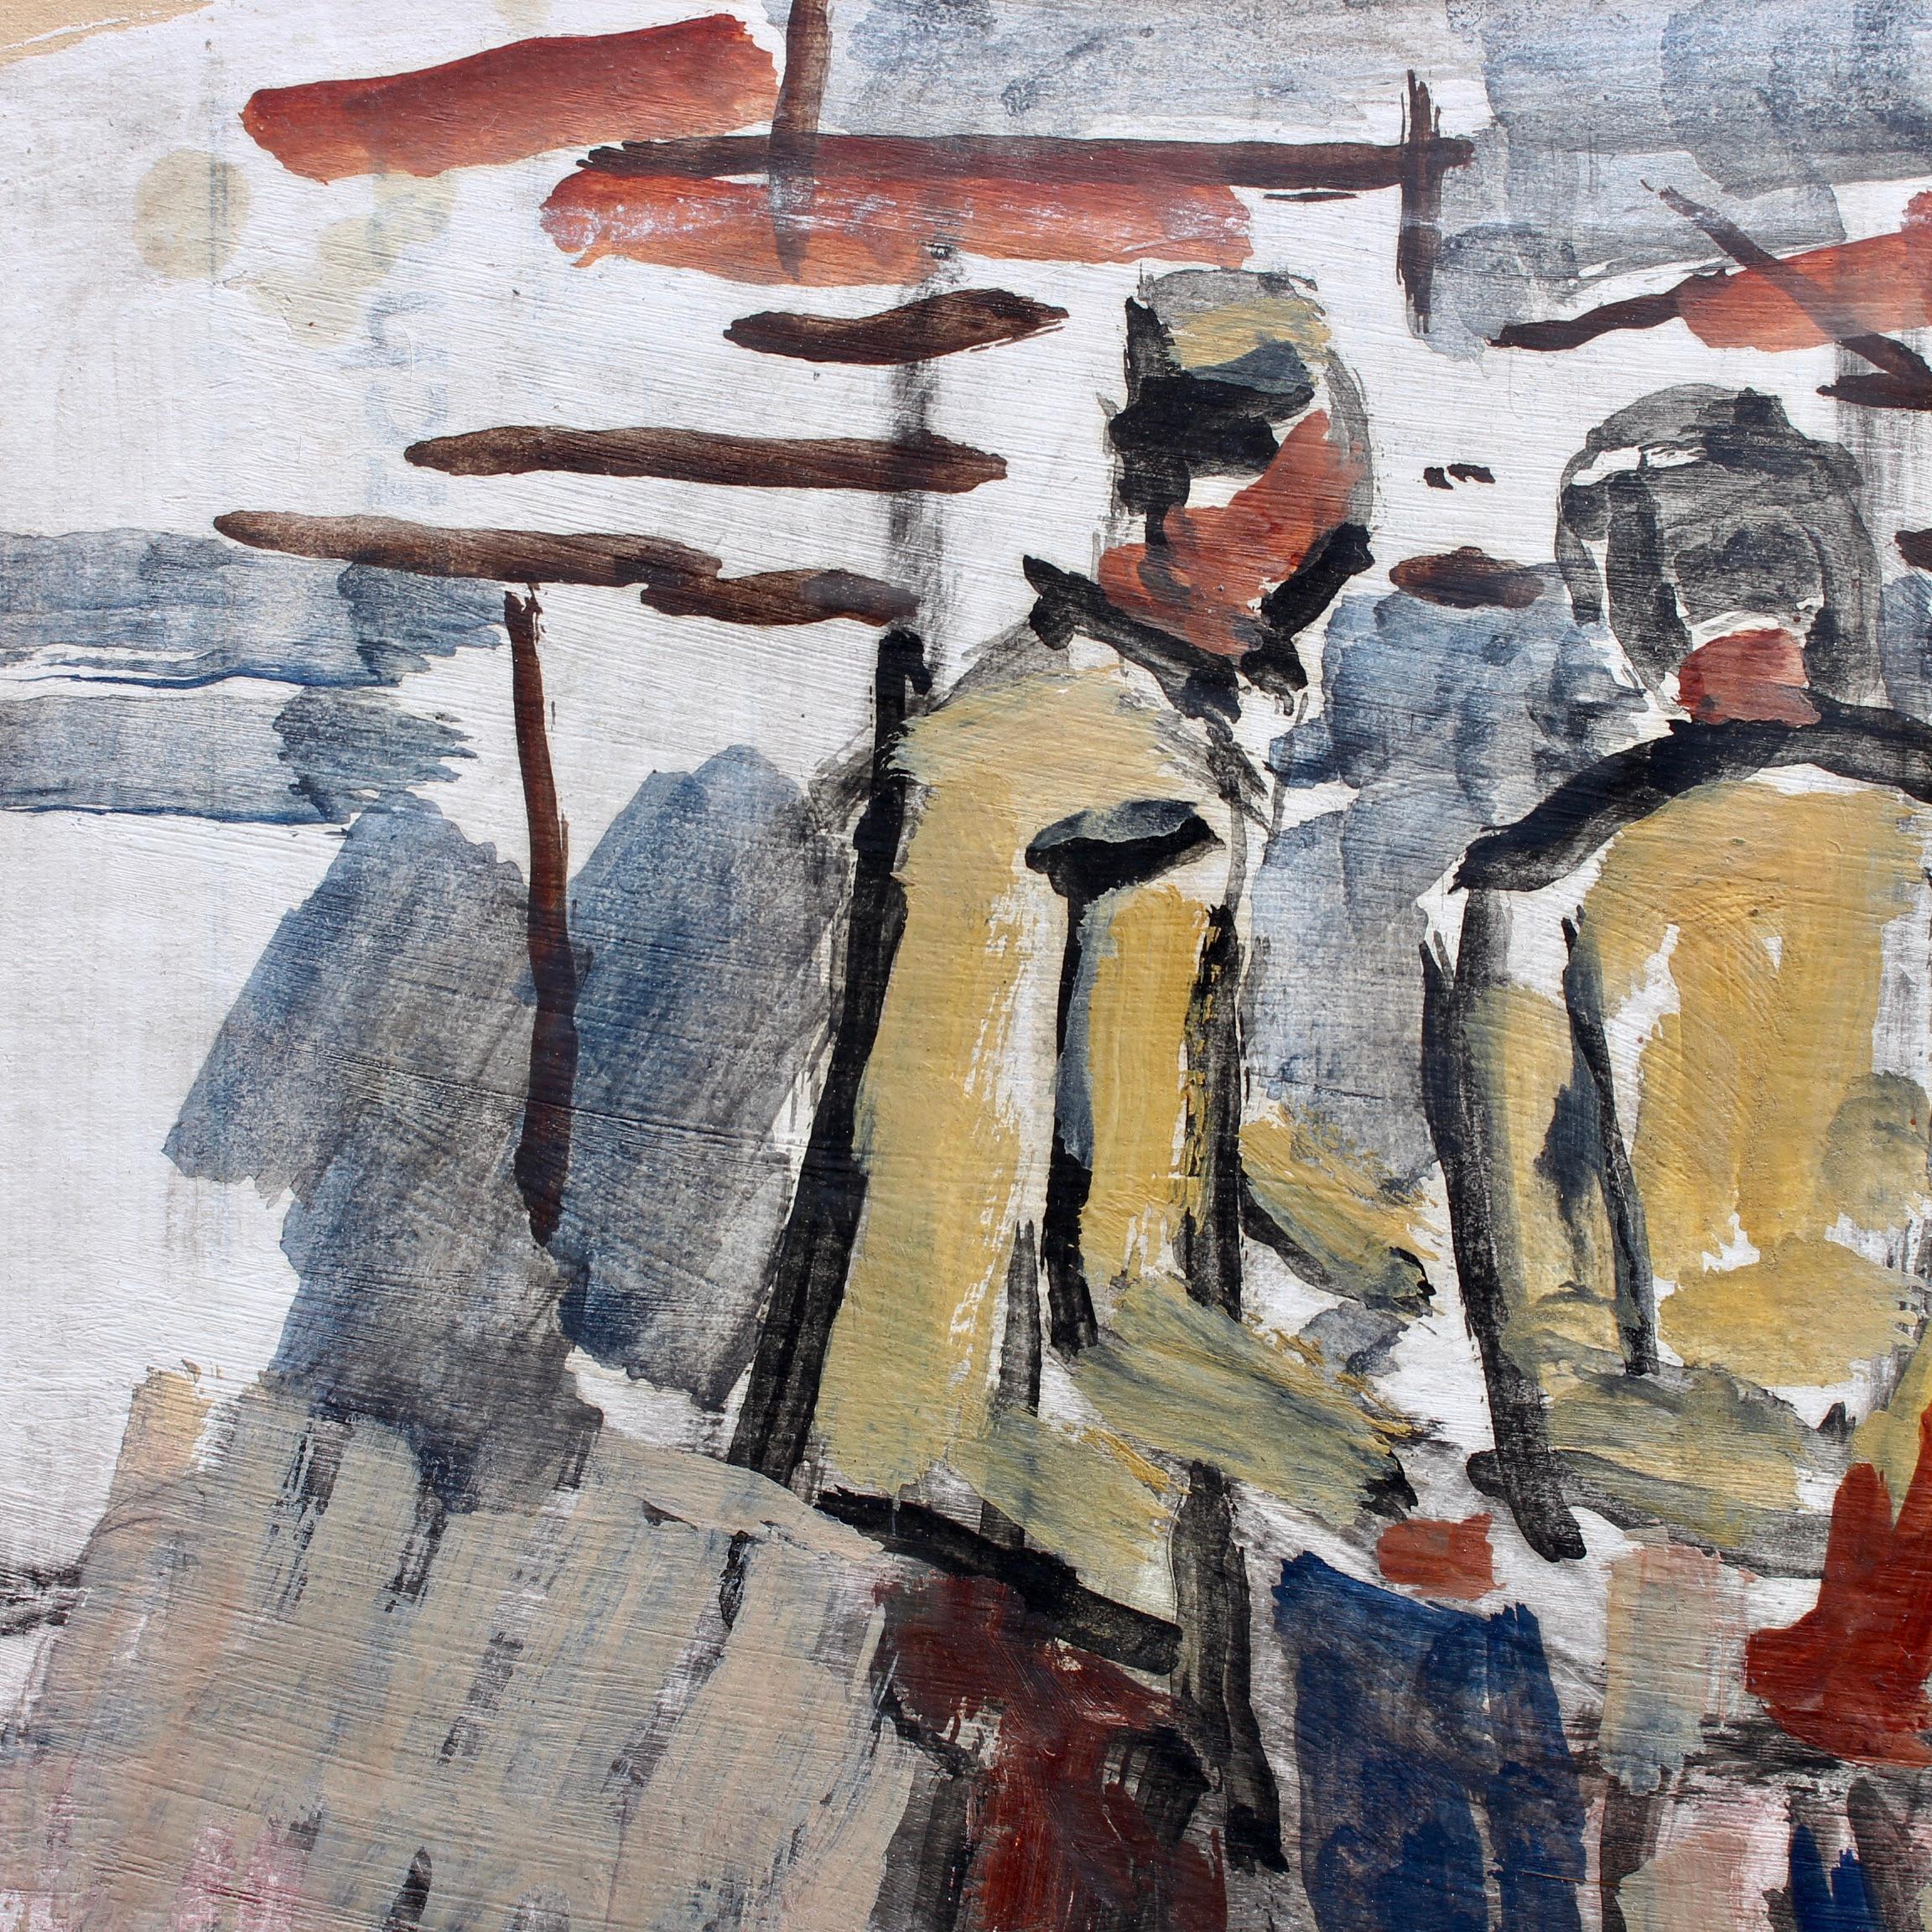 'Men in the Port of Nice', gouache on paper, by Alfred Salvignol (1962). The Port of Nice is one of the key hubs of Nice and, in fact, of the entire French Riviera, standing out as one of the main harbours for the boats which sail across the